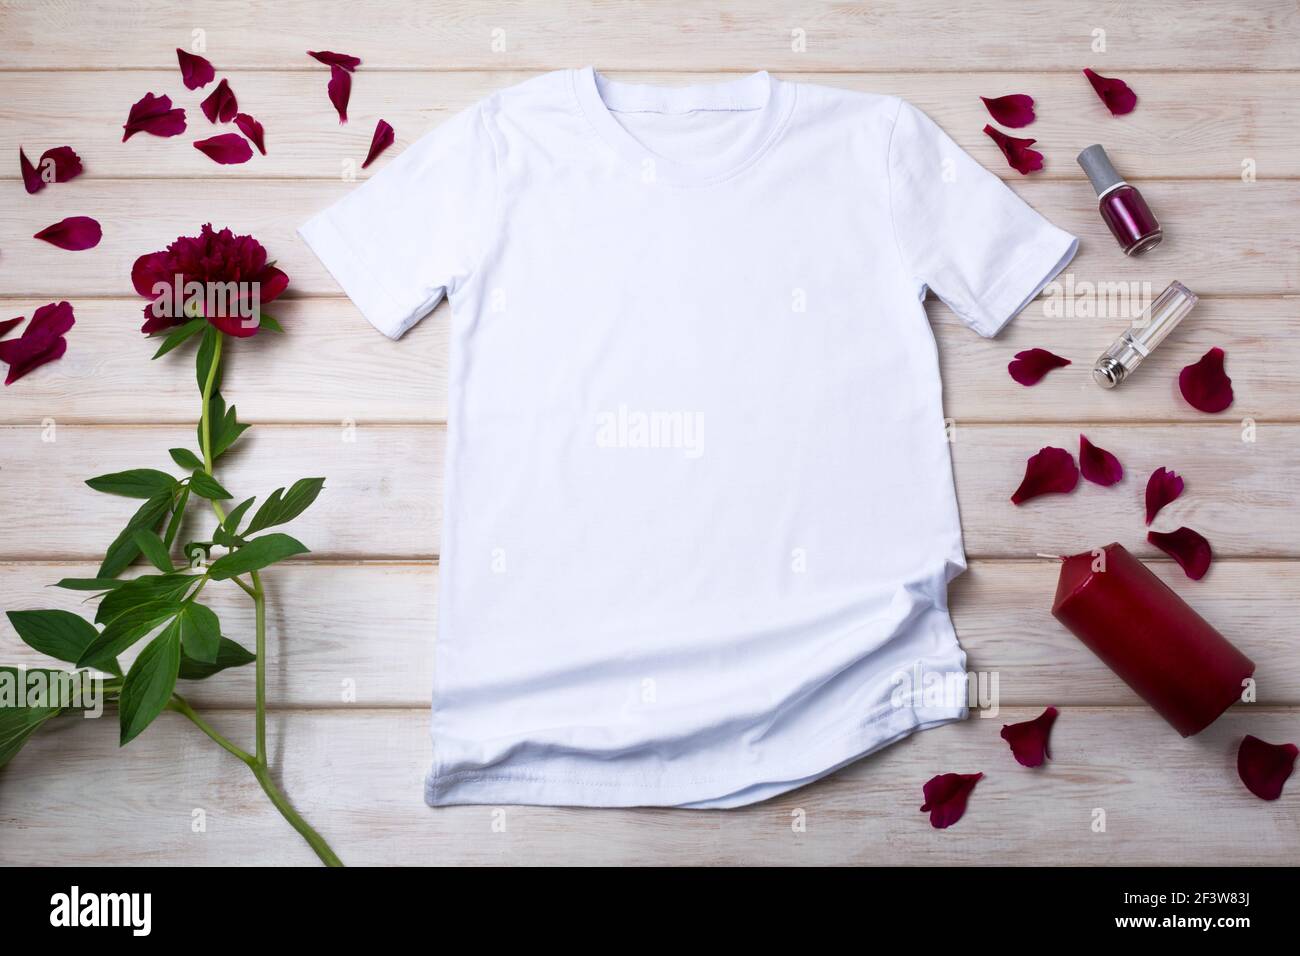 White women cotton T-shirt mockup with red candle and burgundy peony. Design t shirt template, tee print presentation mock up Stock Photo